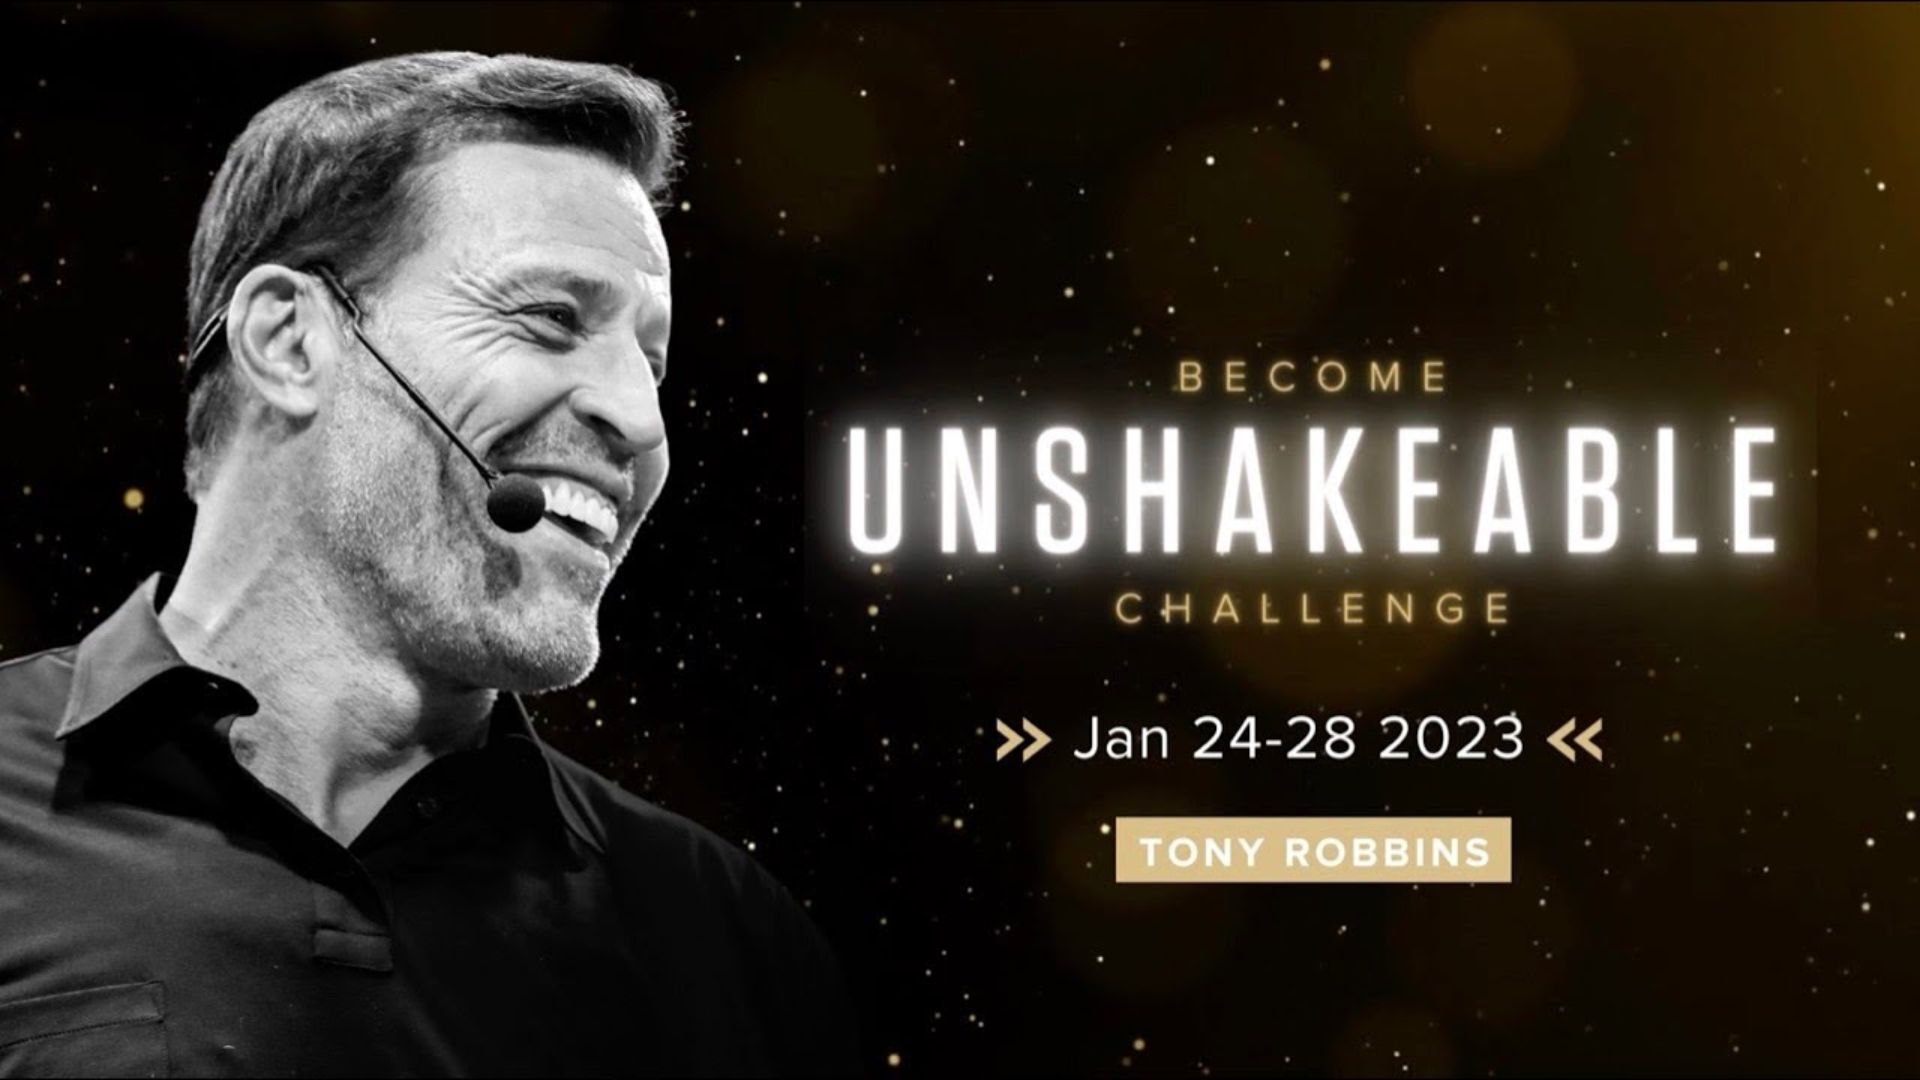 Unshakeable Challenge 2023 by Tony Robbins (In English) karly